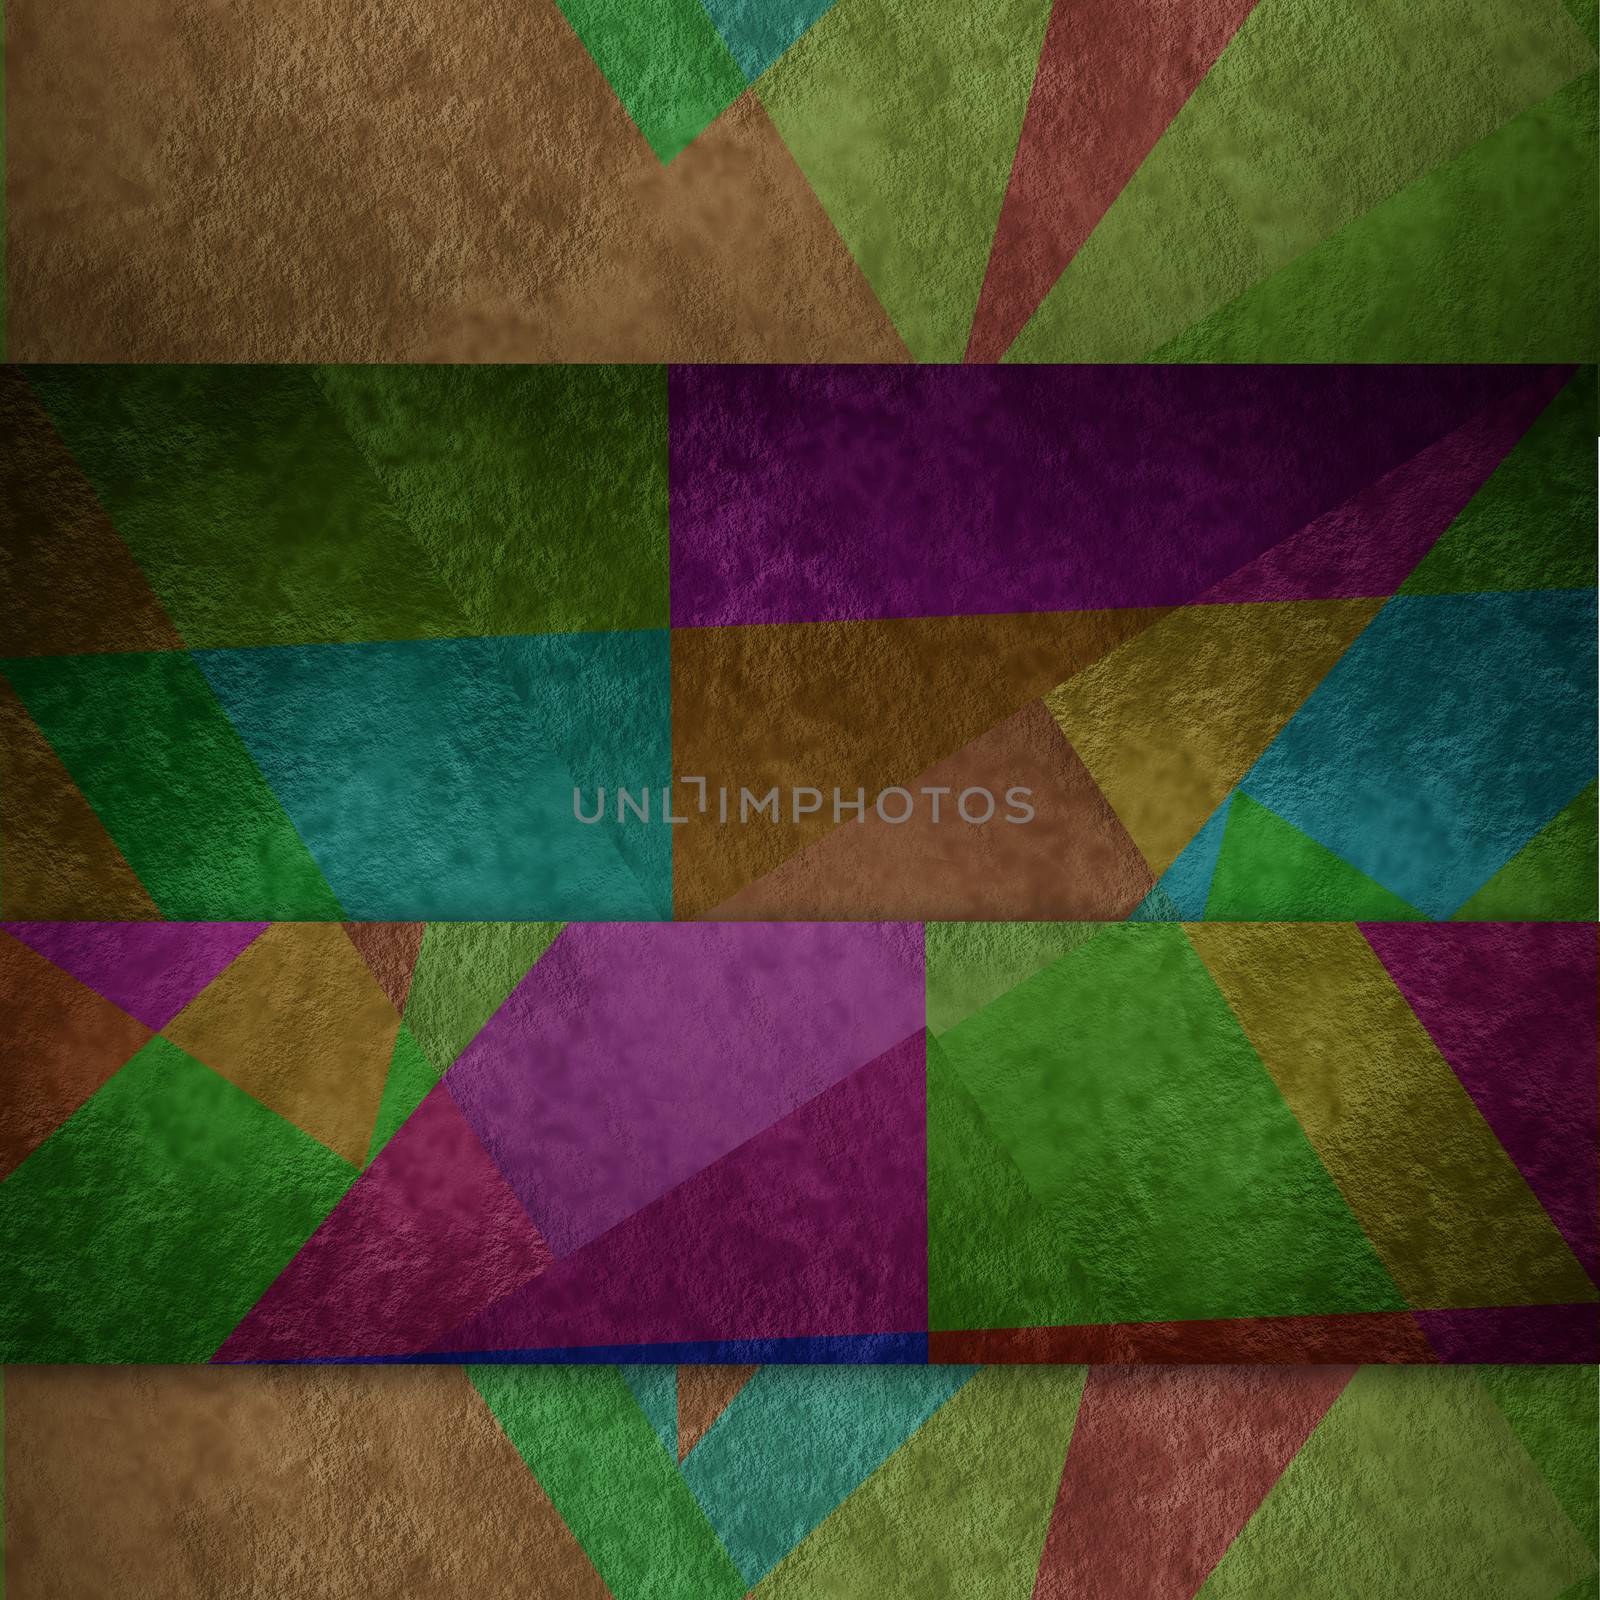 Colorful parchment grunge modern background by Carche